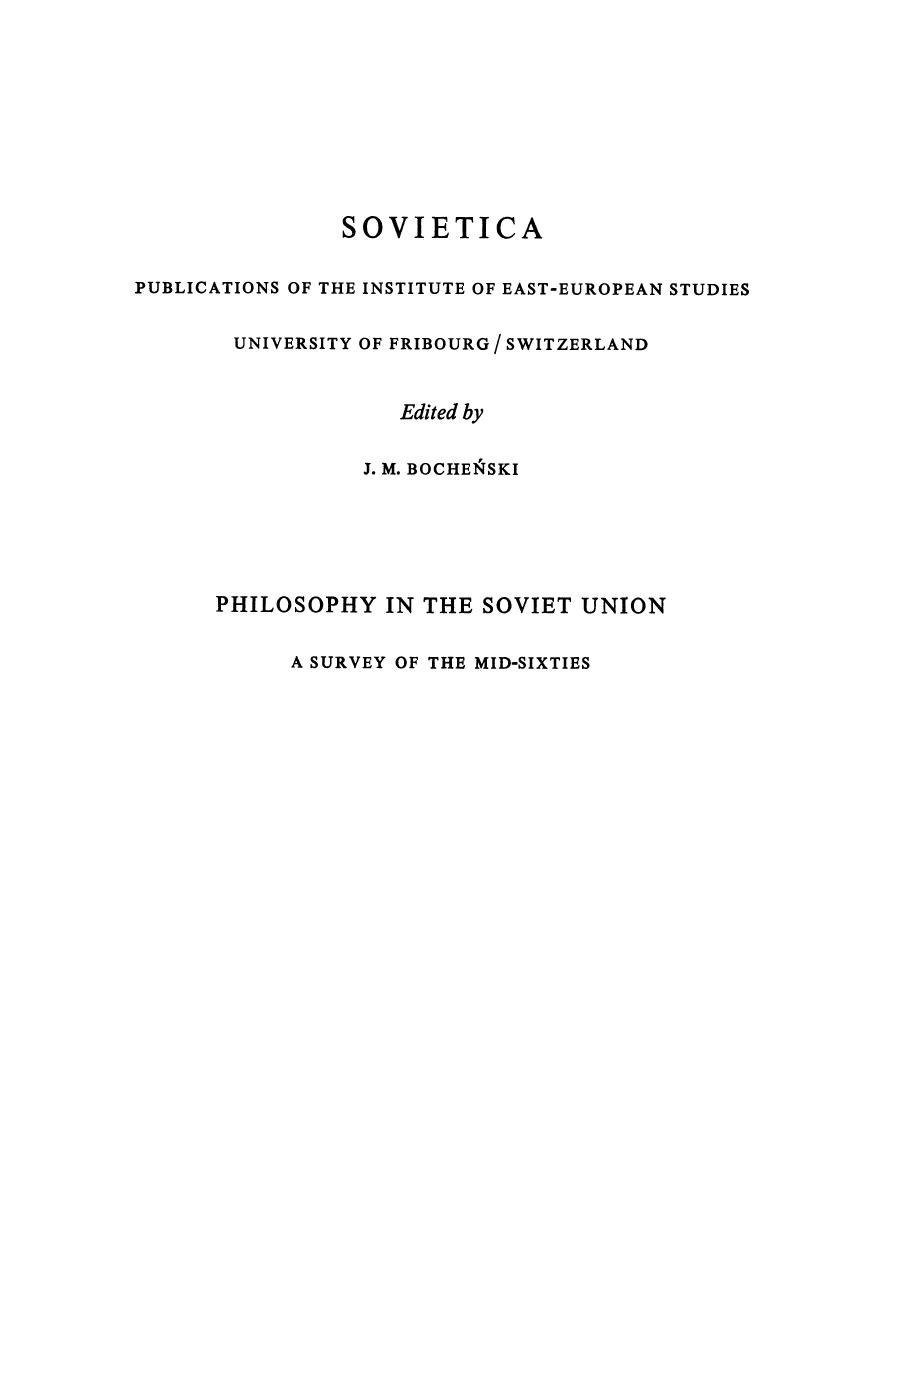 Philosophy in the Soviet Union: A Survey of the Mid-Sixties